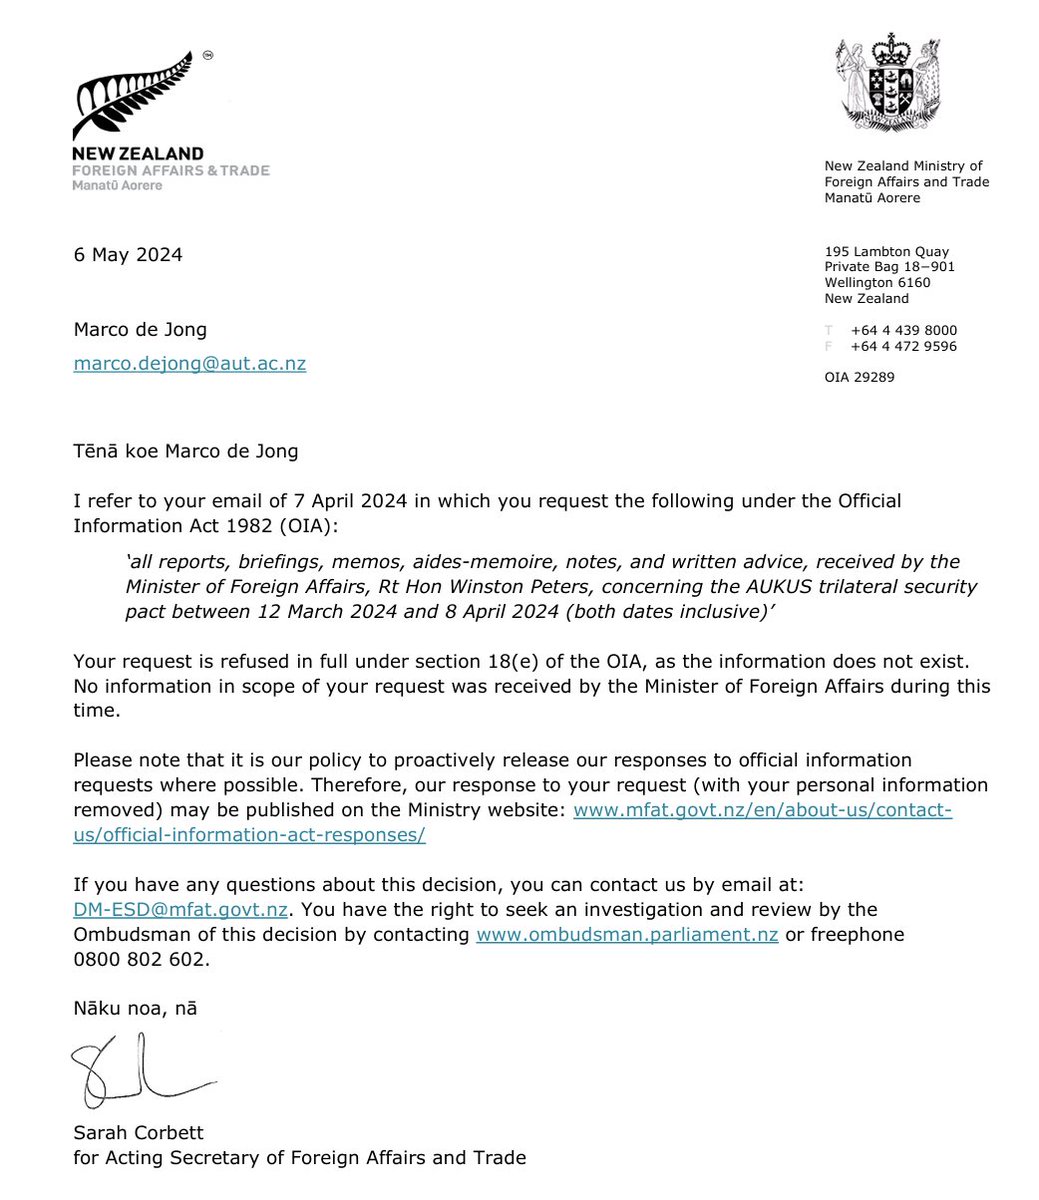 MFAT response to OIA request. Winston Peters did not receive any written advice regarding AUKUS from 12/03/24 - 08/04/24 in his capacity as FM.